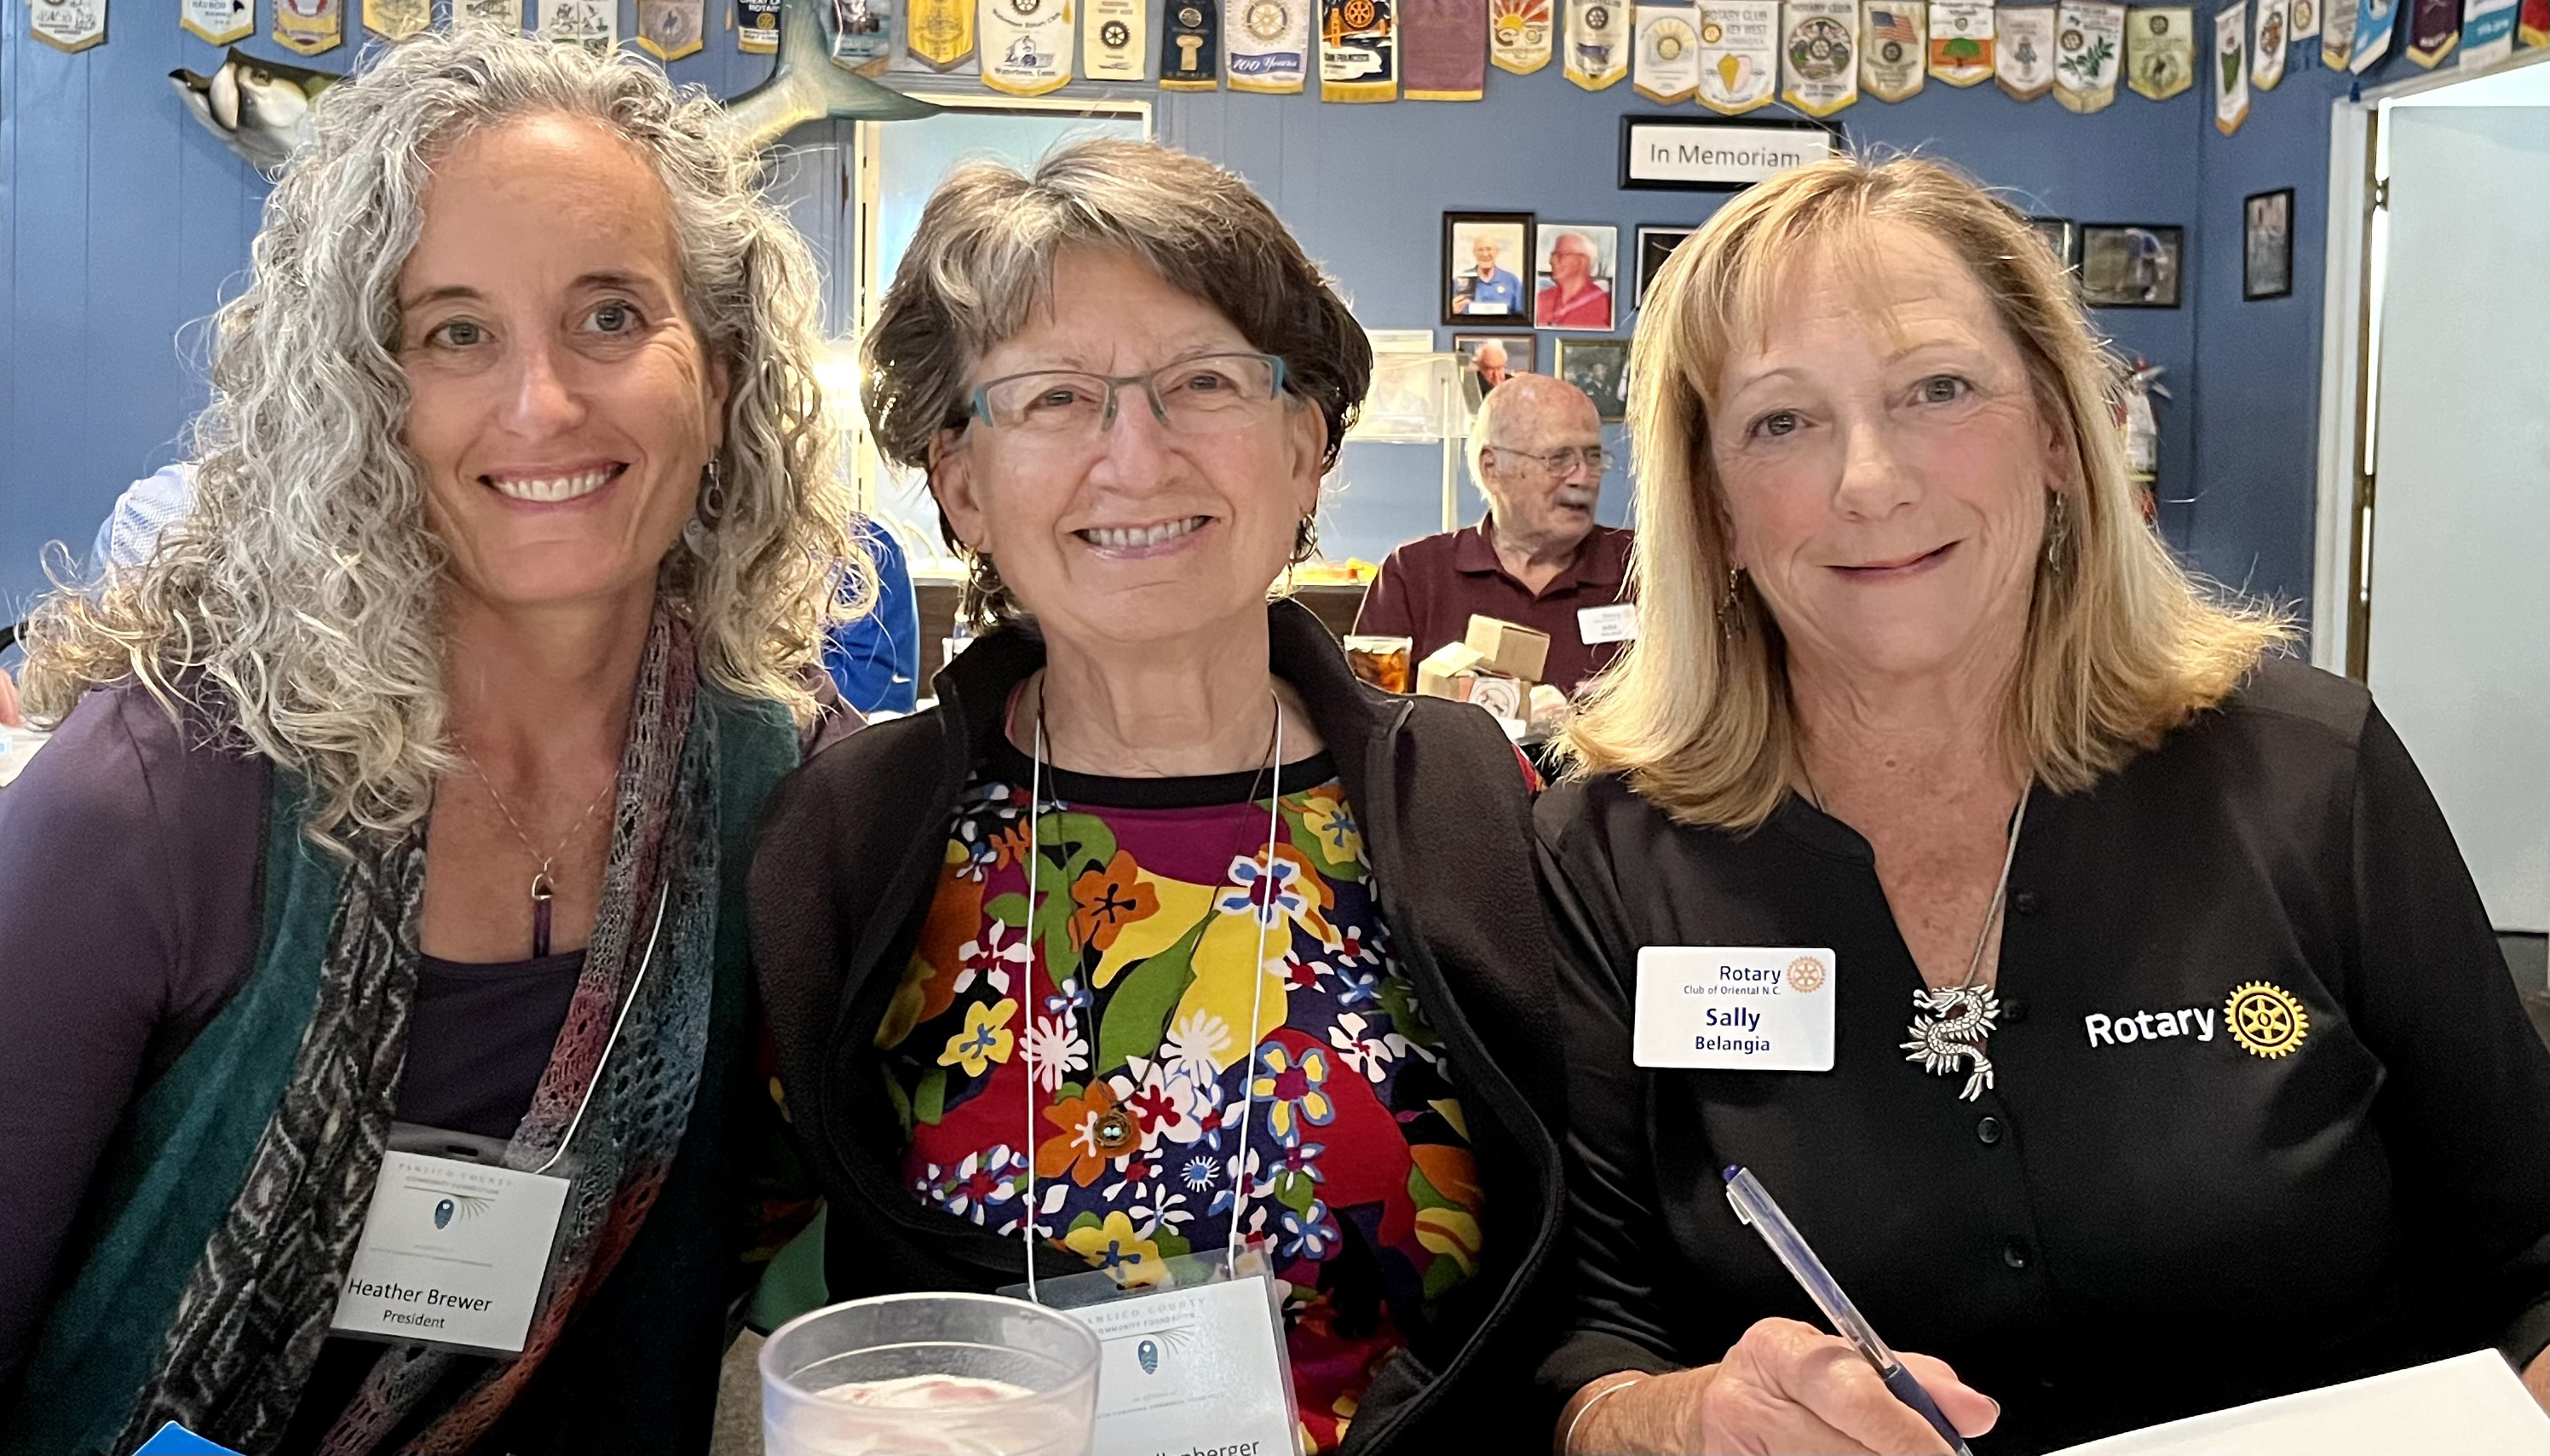 Members of the Pamlico County Community Foundation held a reception to celebrate their community grants on Oct. 10 at the Rotary Club of Oriental. From left to right, are Heather Brewer, PCCF president, and Leslie Kellenberger and Sally Belangia, both PCCF board members.